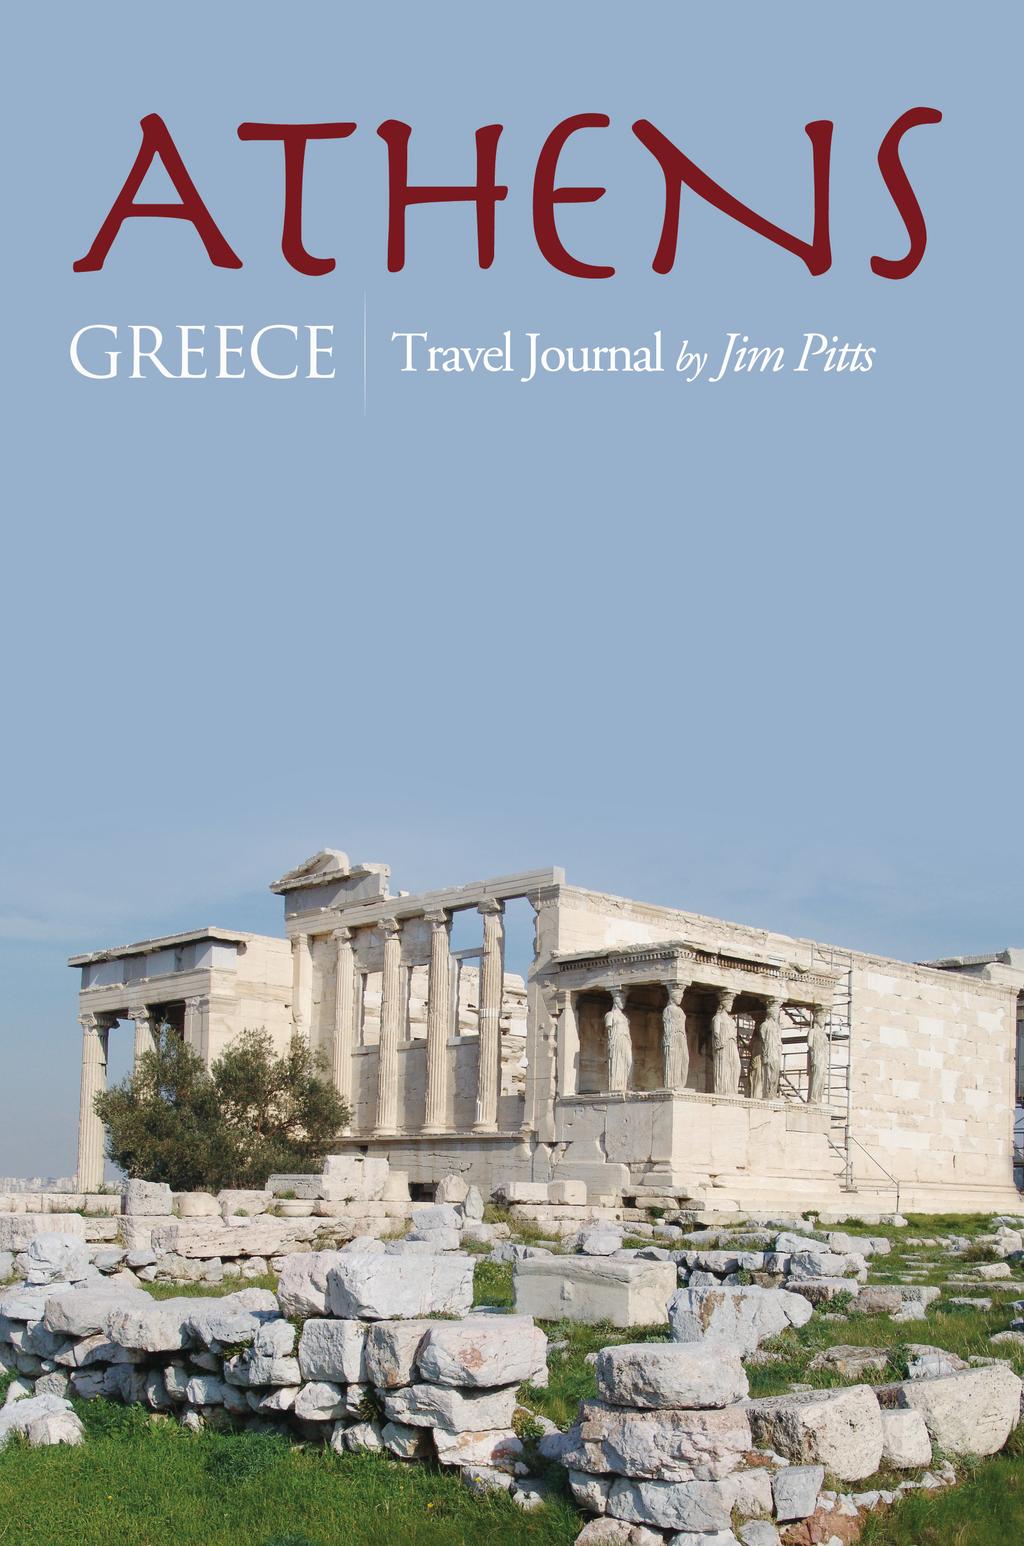 ATHENS, ONE OF THE OLDEST CITIES in the world, has been continuously inhabited for at least 7,000 years.